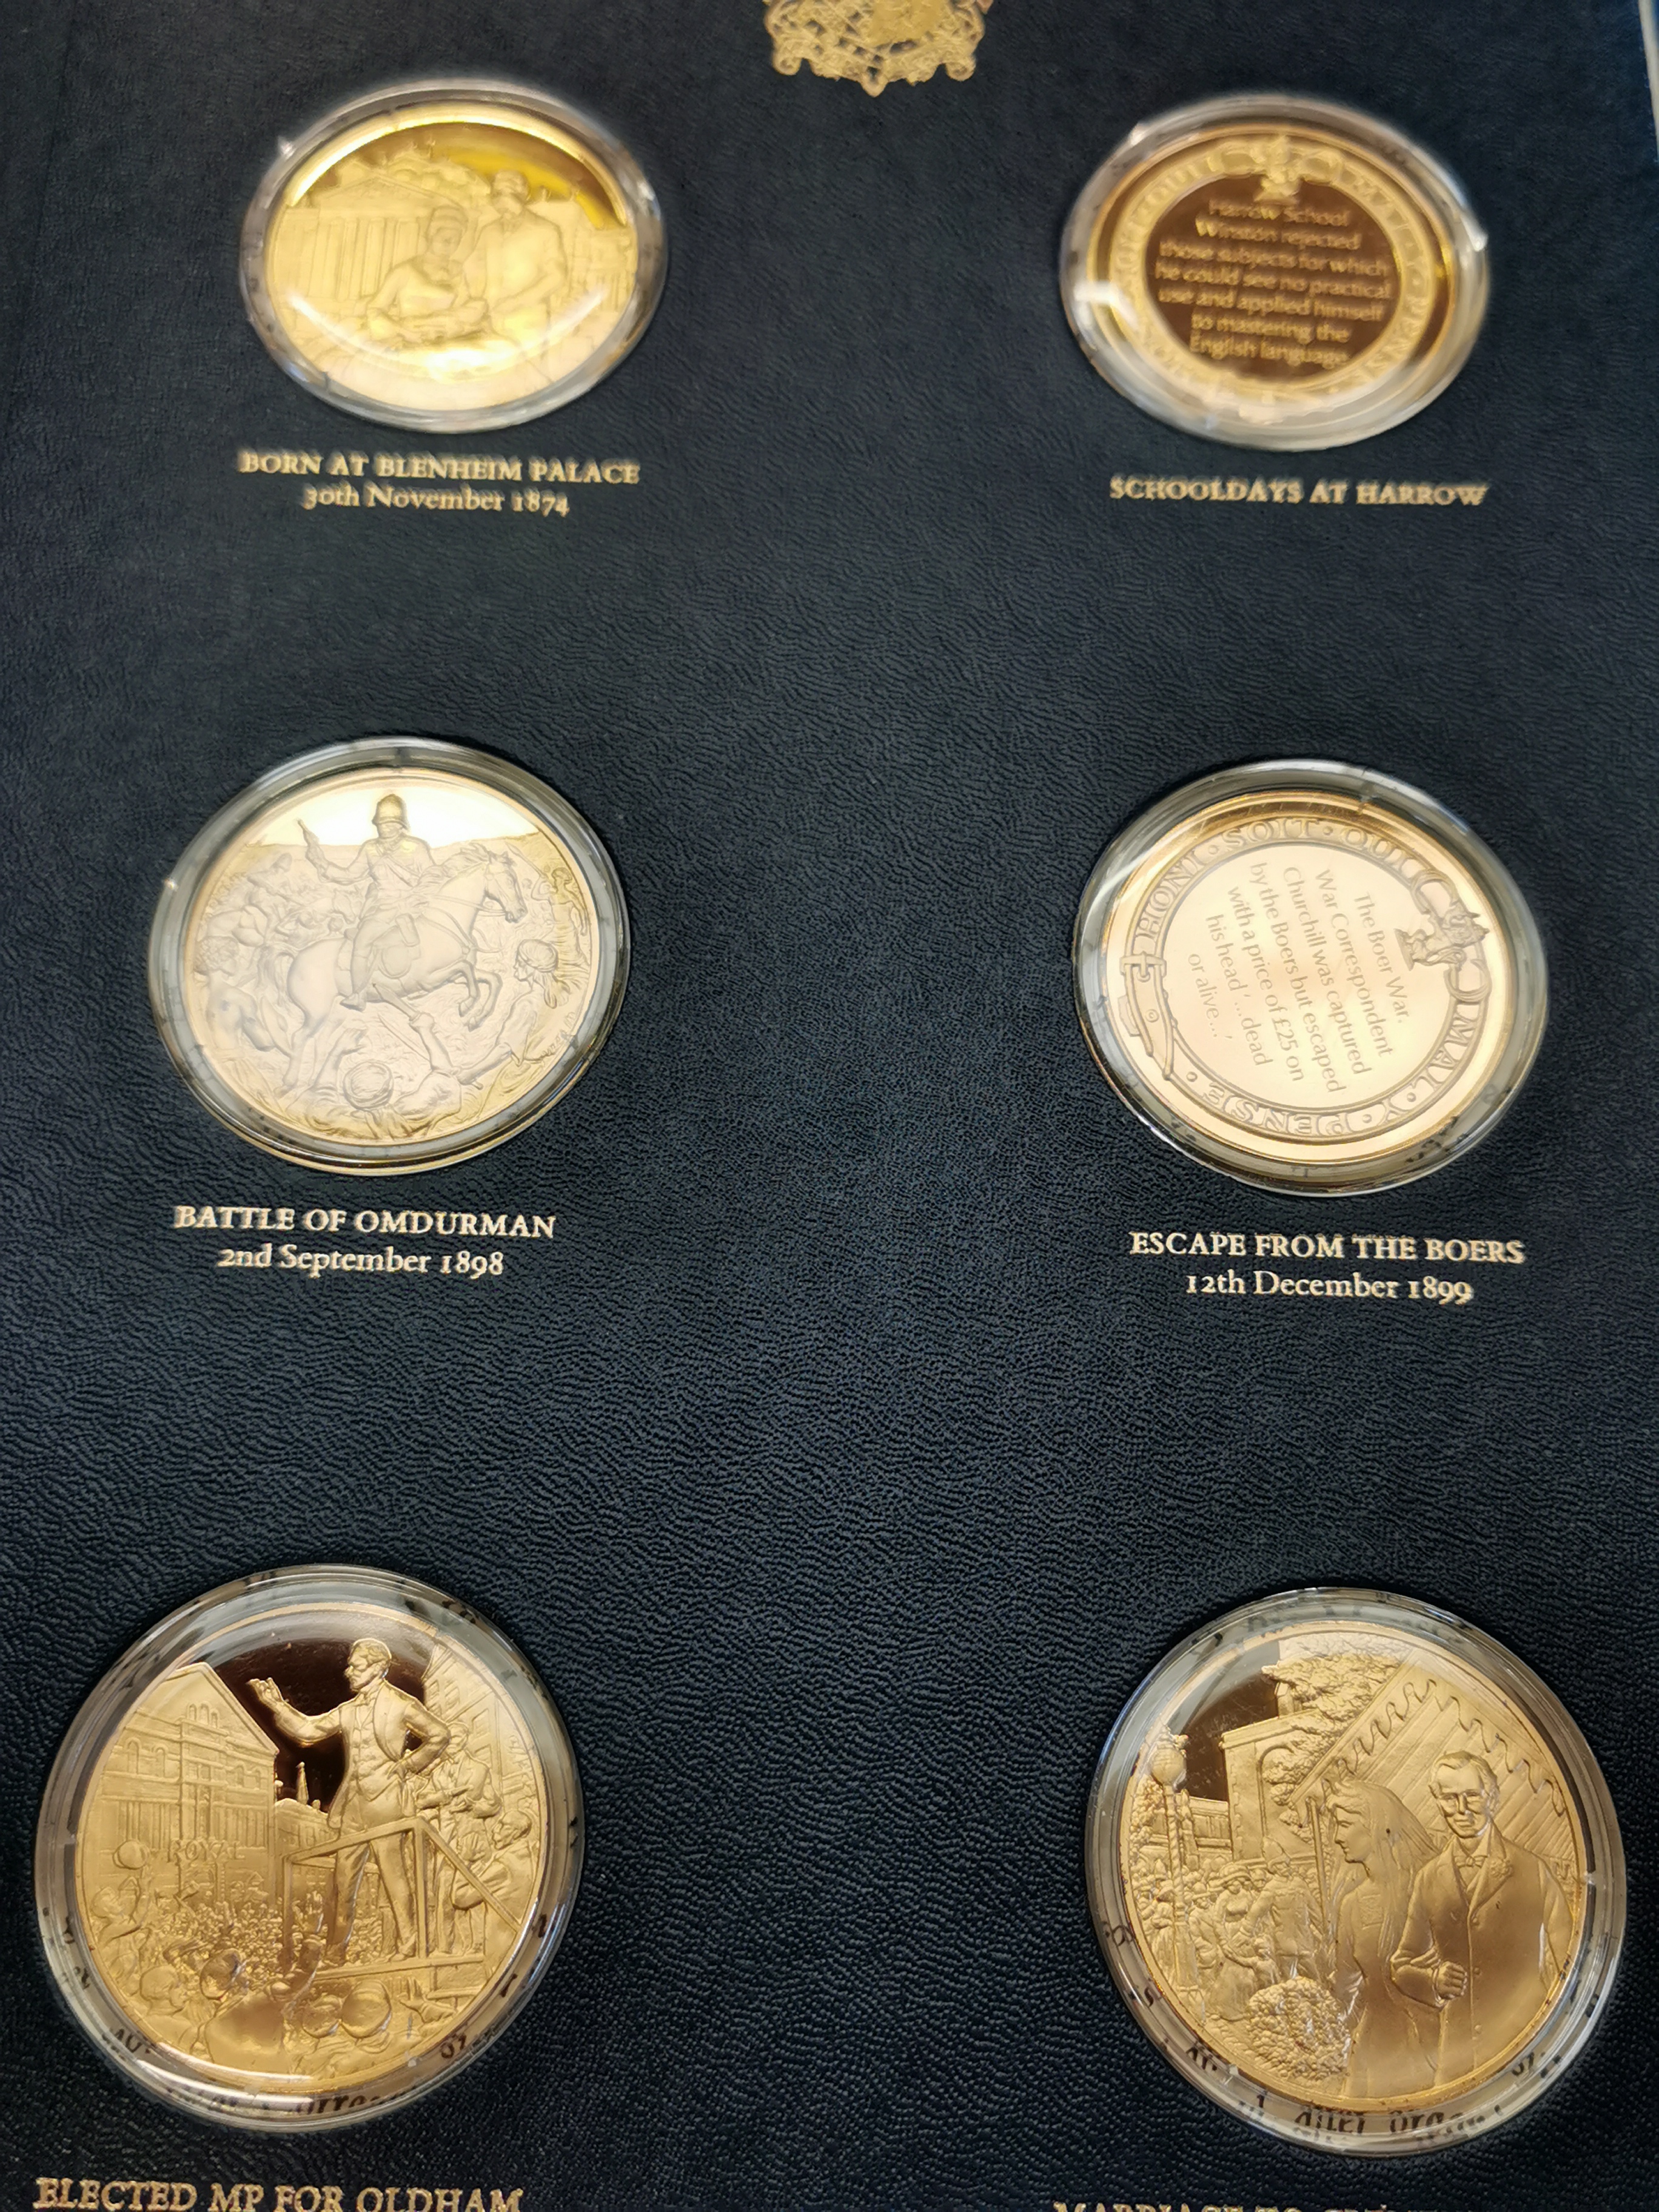 Churchill Centenary Medals Set - 24 Gold Plated Sterling Silver Medals - total weight 600g - Image 3 of 3